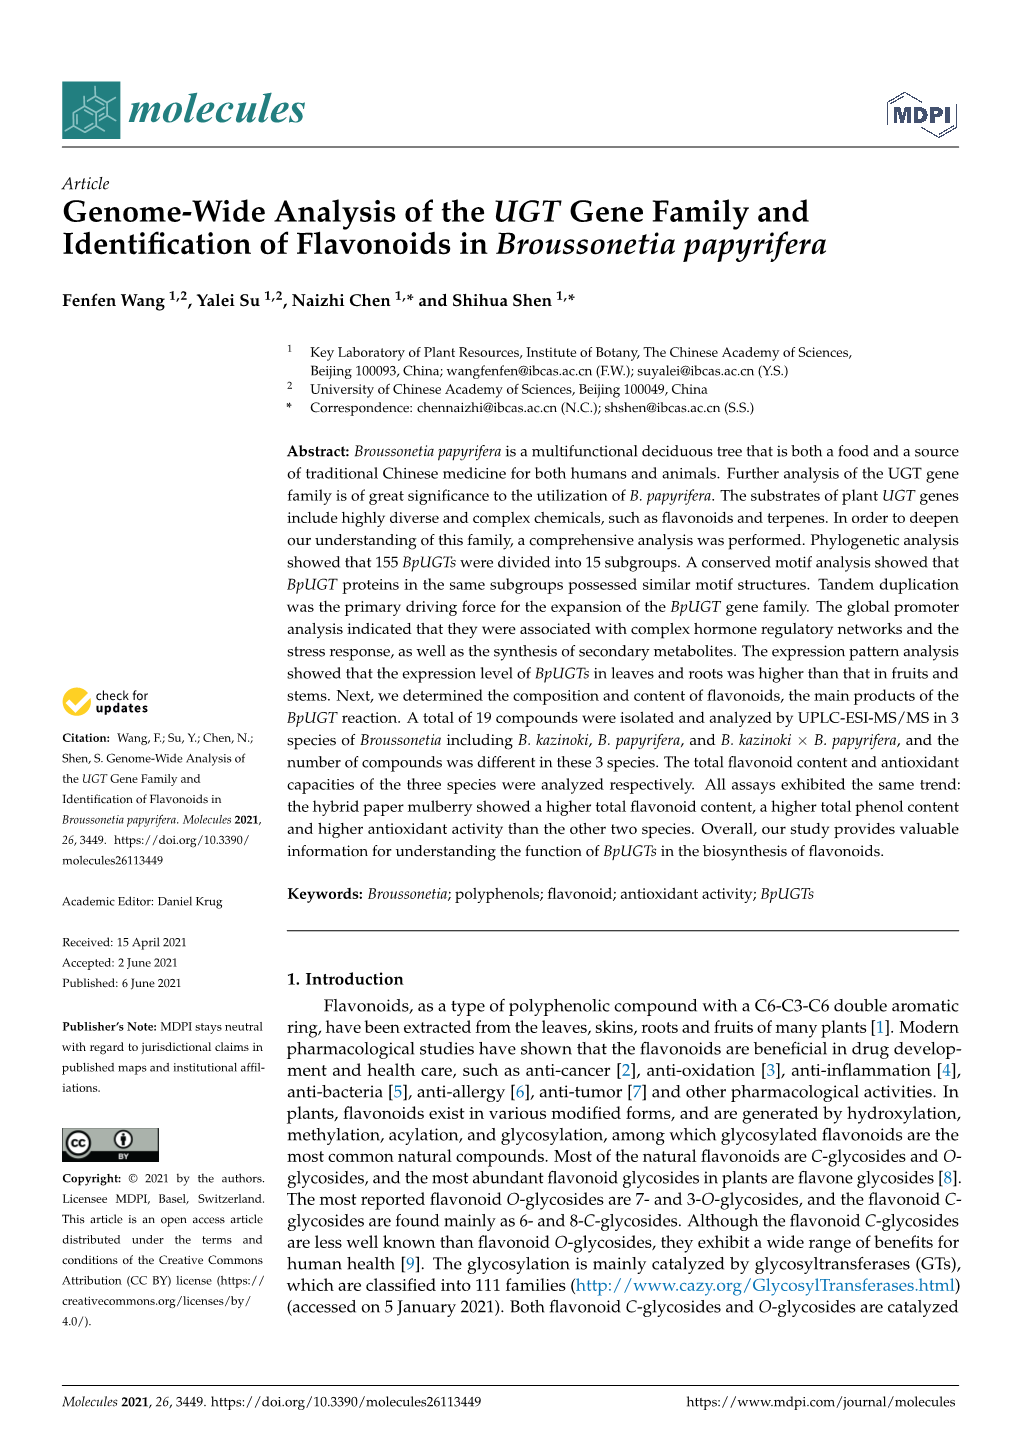 Genome-Wide Analysis of the UGT Gene Family and Identification of Flavonoids in Broussonetia Papyrifera